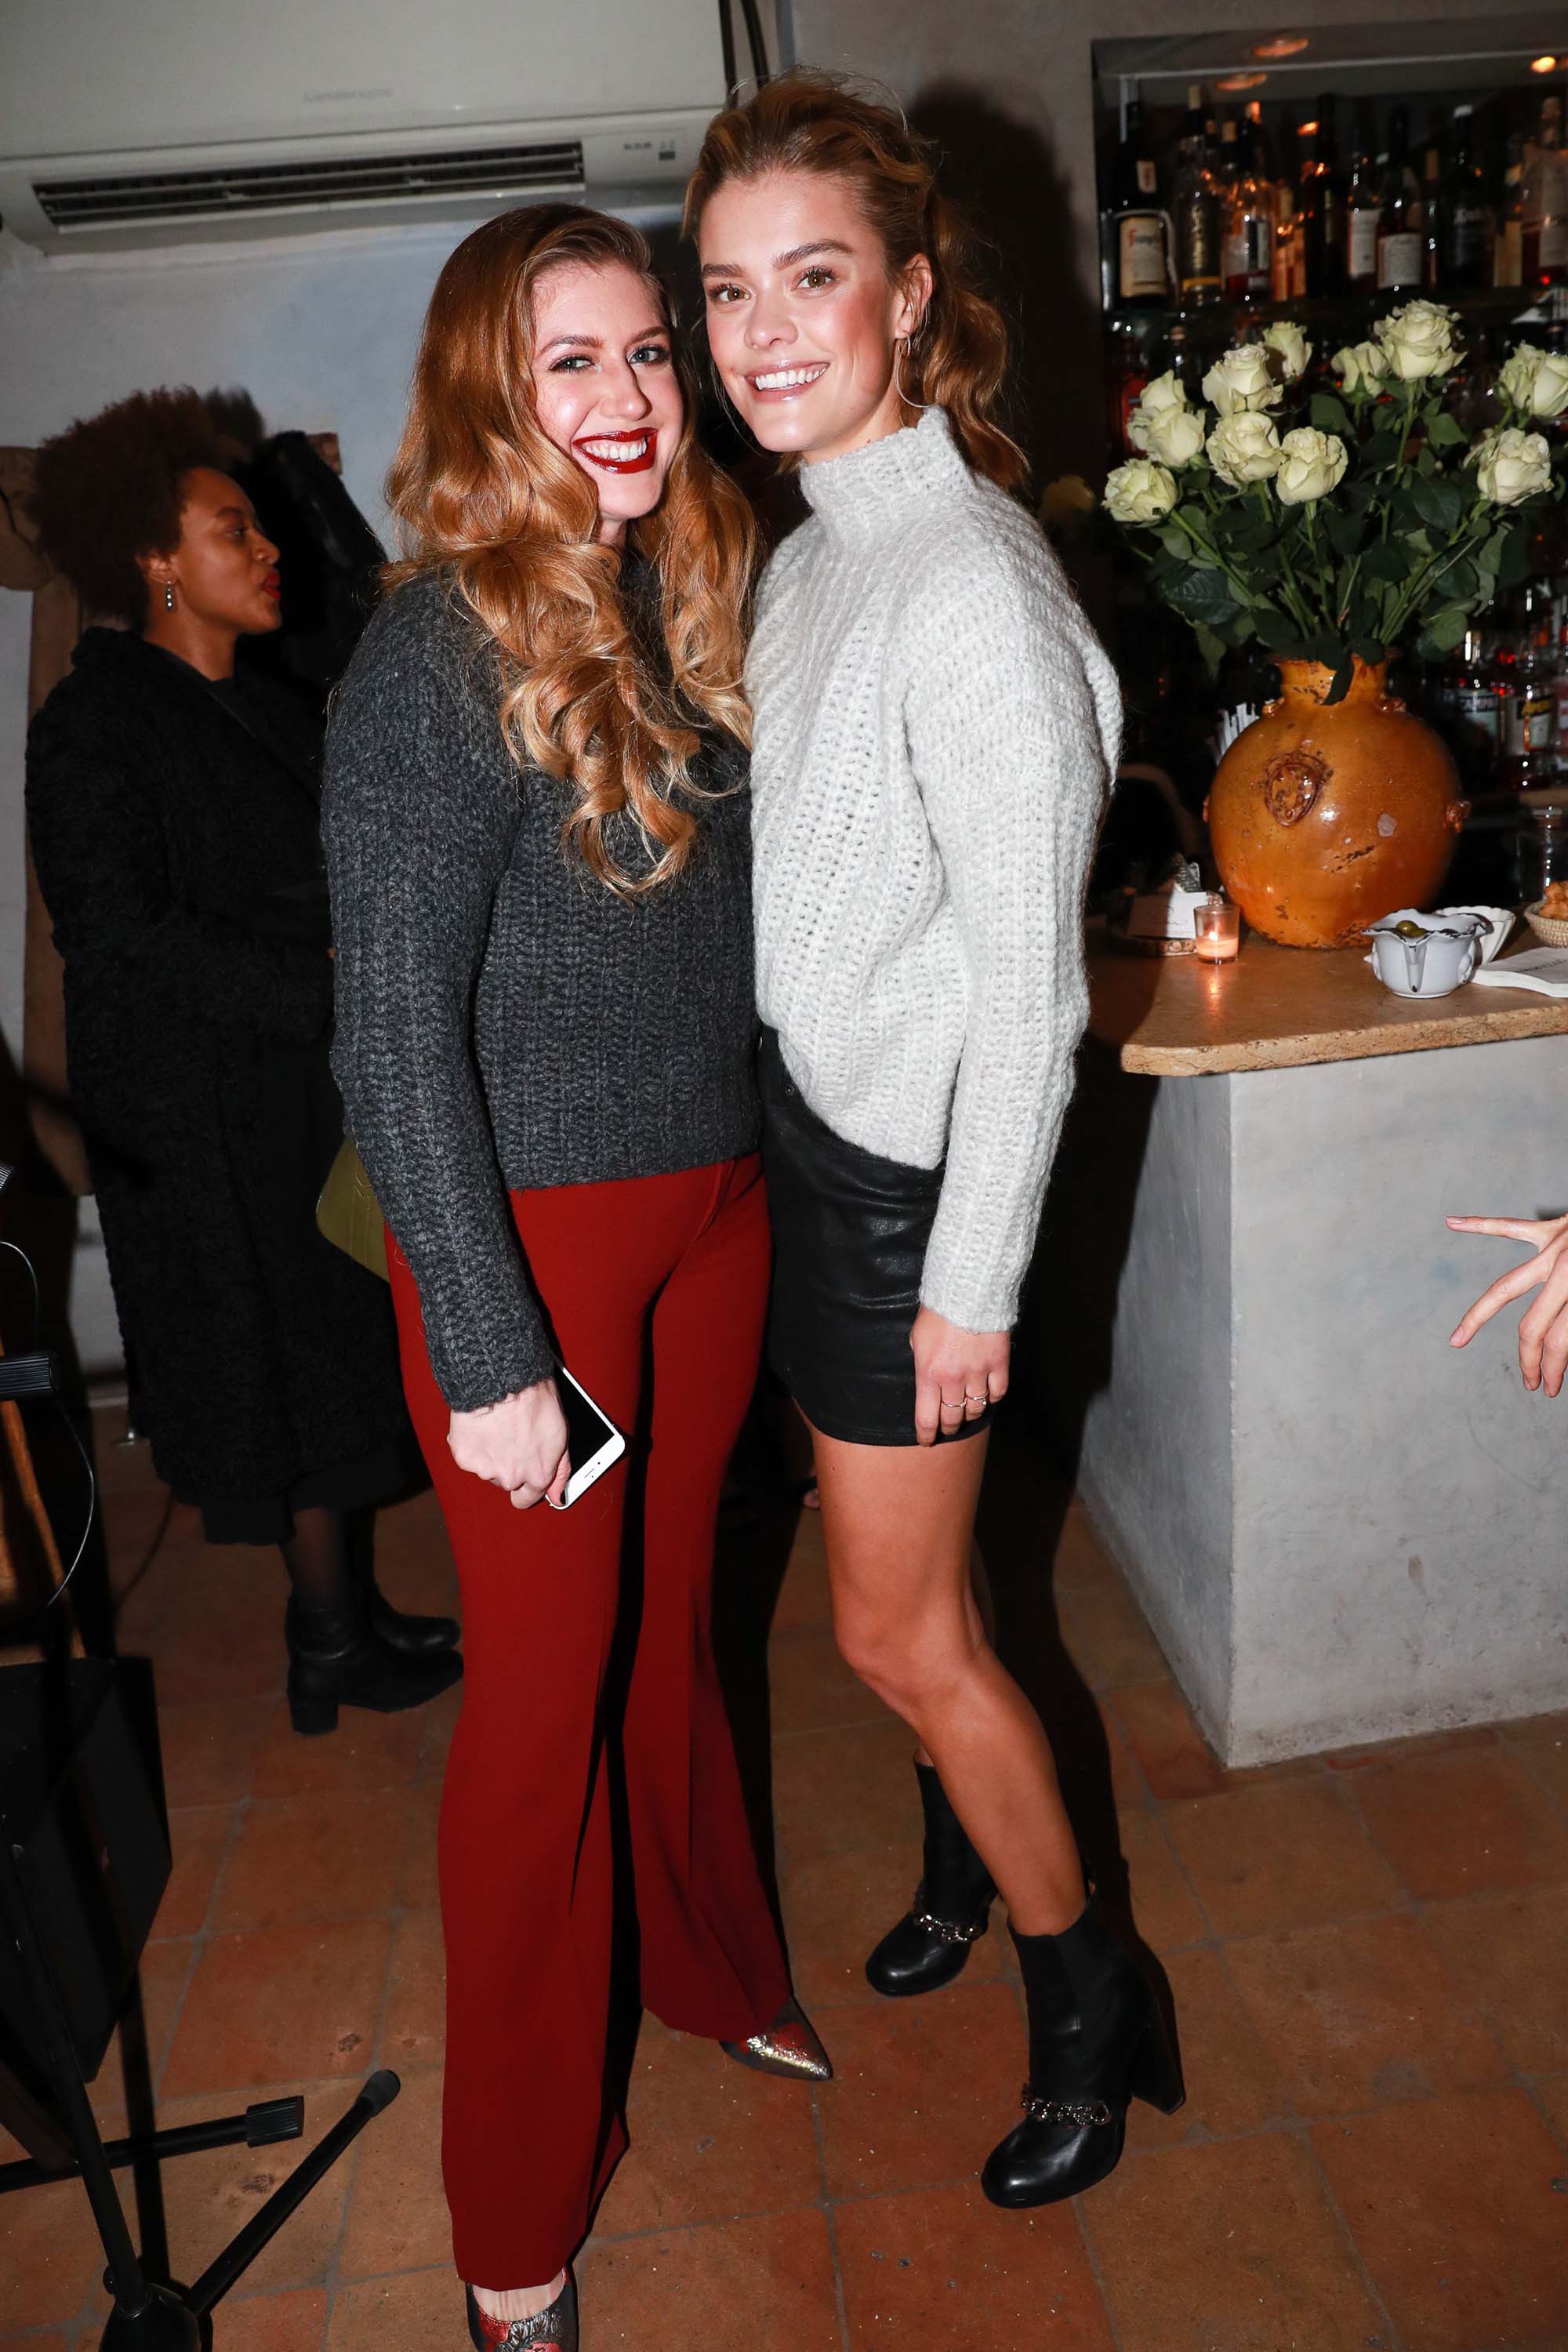 Nina Agdal attends AerieREAL Role Models dinner party